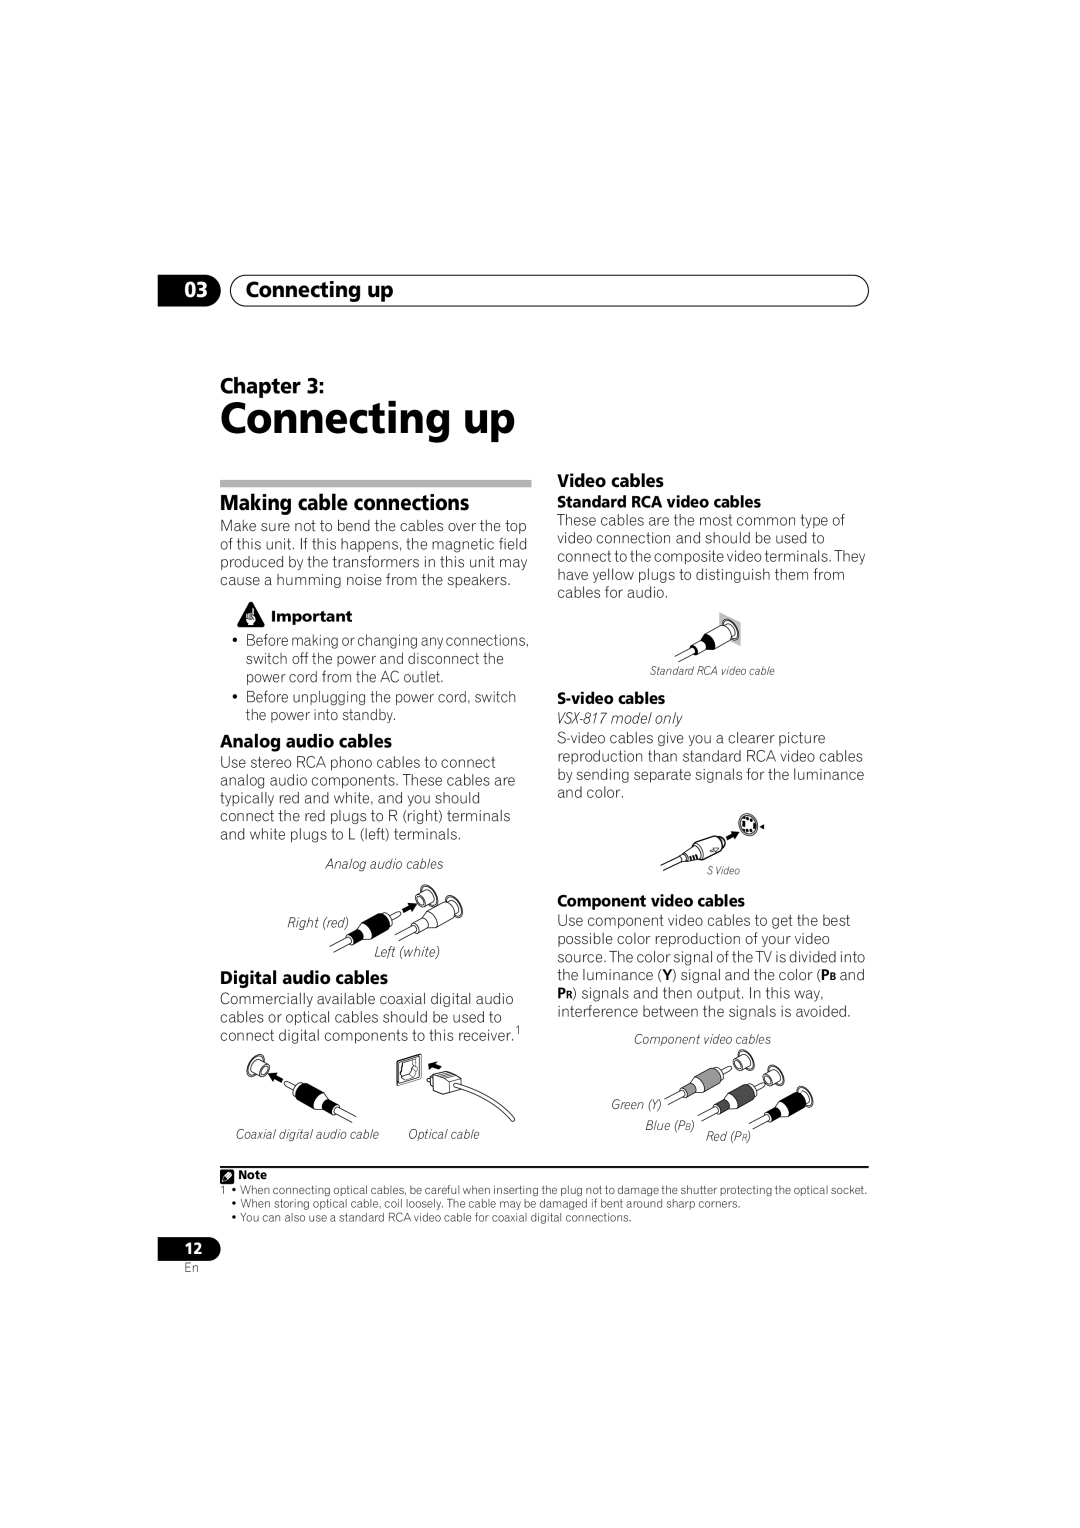 Pioneer VSX-517-S/-K manual 03Connecting up Chapter, Making cable connections, Video cables, Analog audio cables 